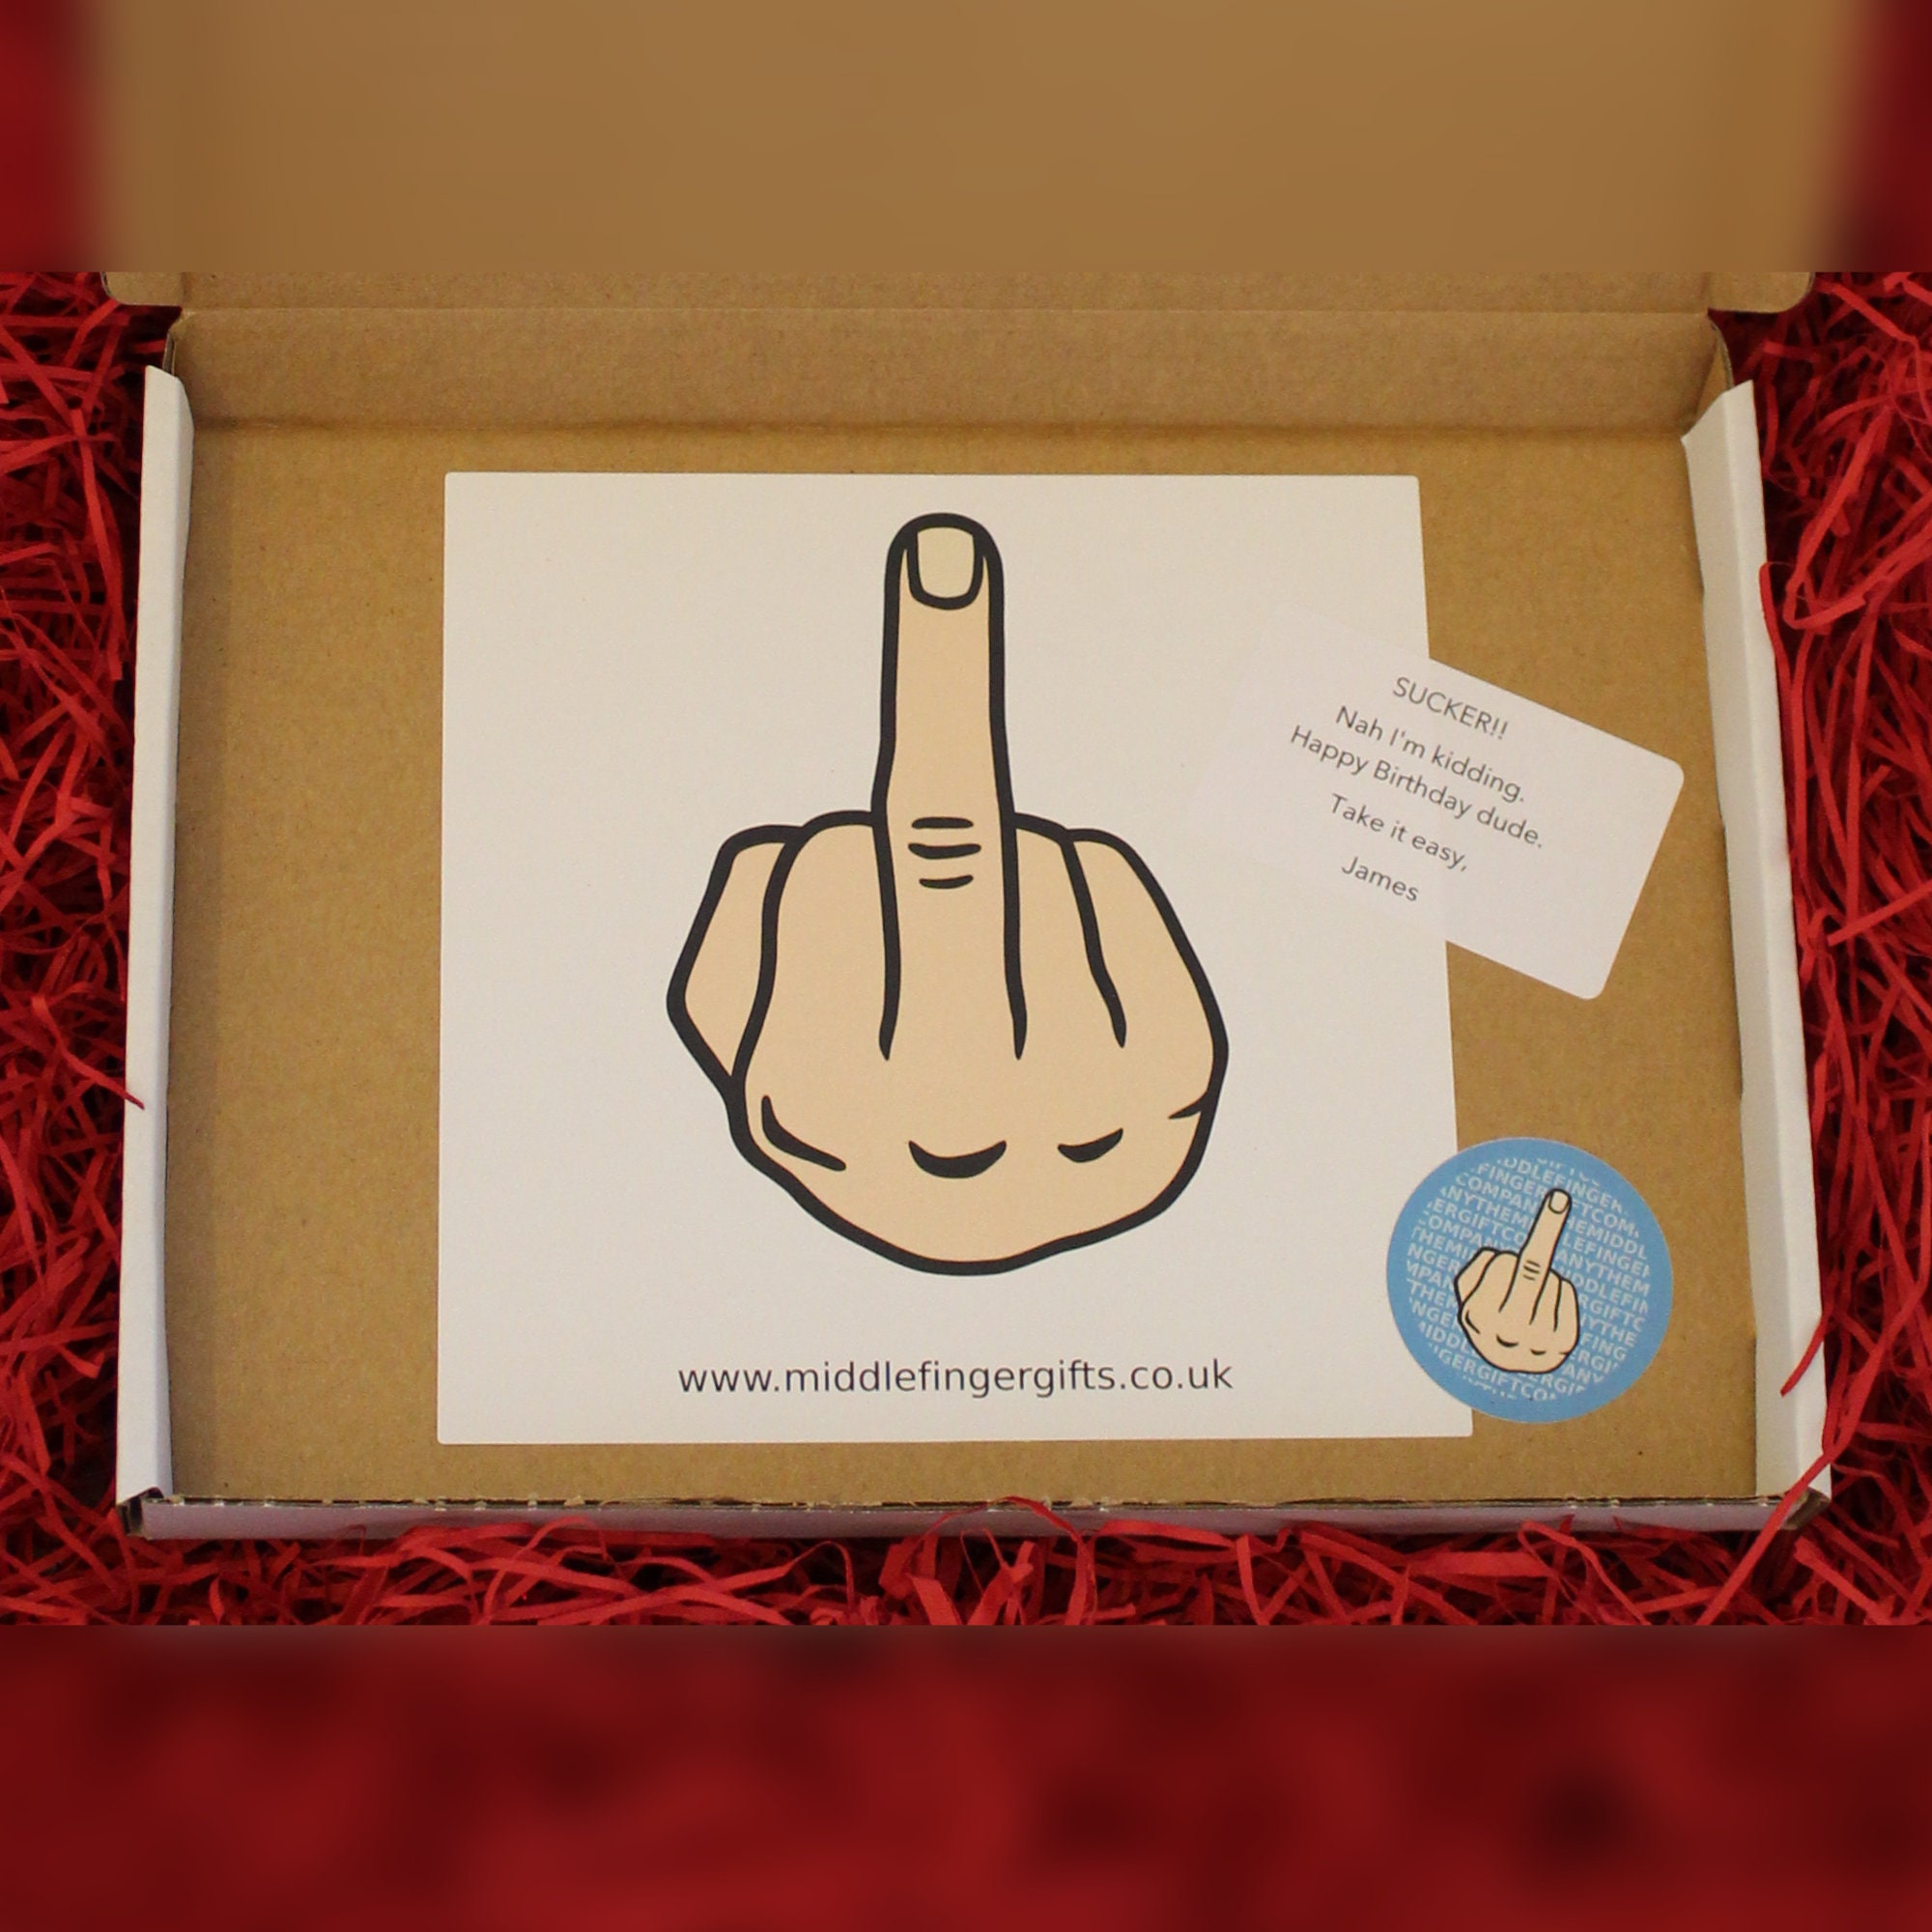 Middle Finger Box Prank Mail Post Gift Box Gag Funny Birthday, Christmas  Present 100% Anonymous 